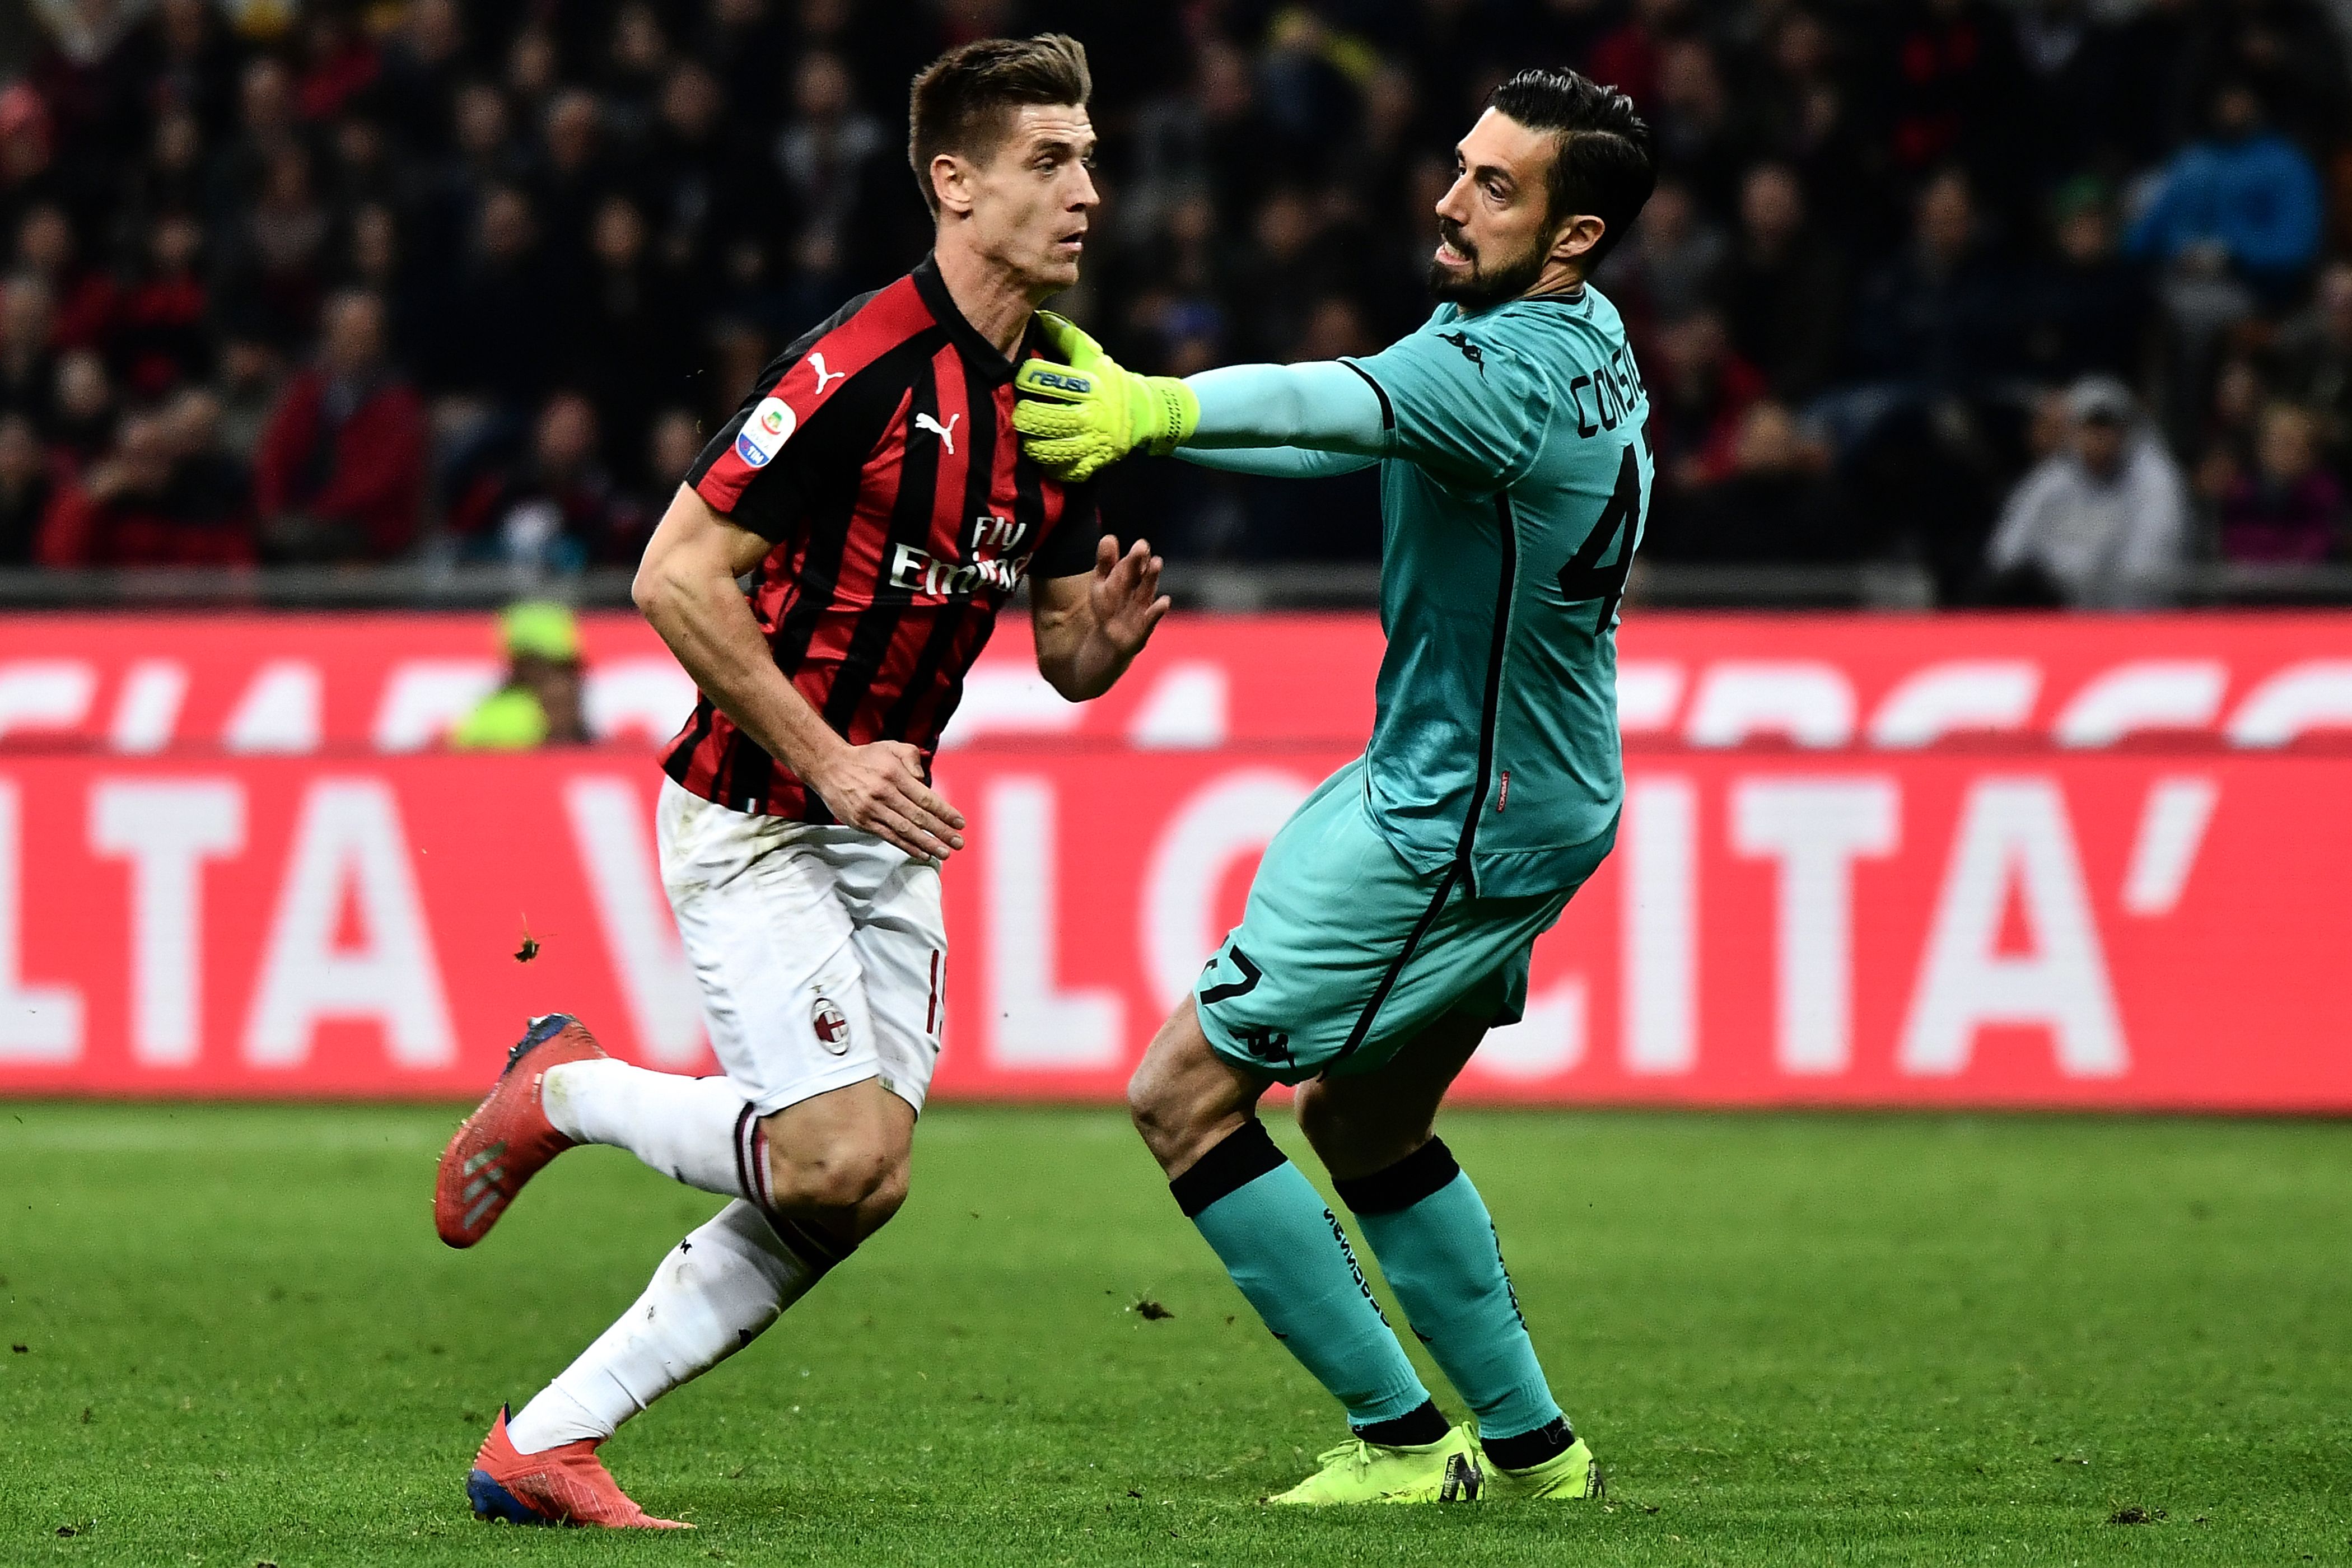 Sassuolo's Italian goalkeeper Andrea Consigli (R) pushes AC Milan's Polish forward Krzysztof Piatek (L) during the Italian Serie A football match between AC Milan and Sassuolo on March 2, 2019 at the San Siro stadium in Milan. (Photo by MARCO BERTORELLO / AFP) (Photo credit should read MARCO BERTORELLO/AFP/Getty Images)